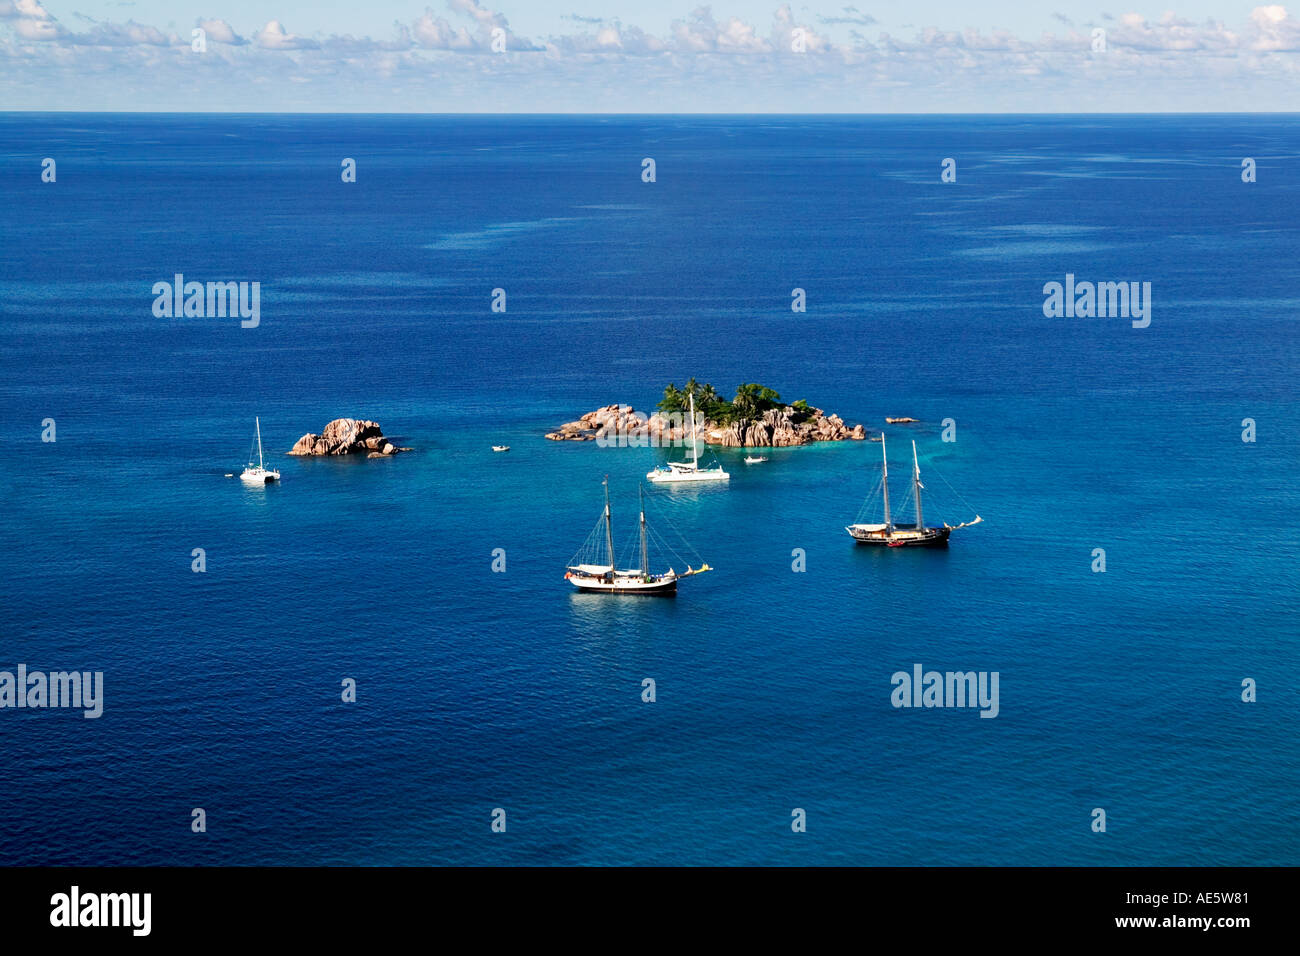 Aerial view of Saint Pierre Islet with sailing boats off the coast of Praslin Island Seychelles Stock Photo